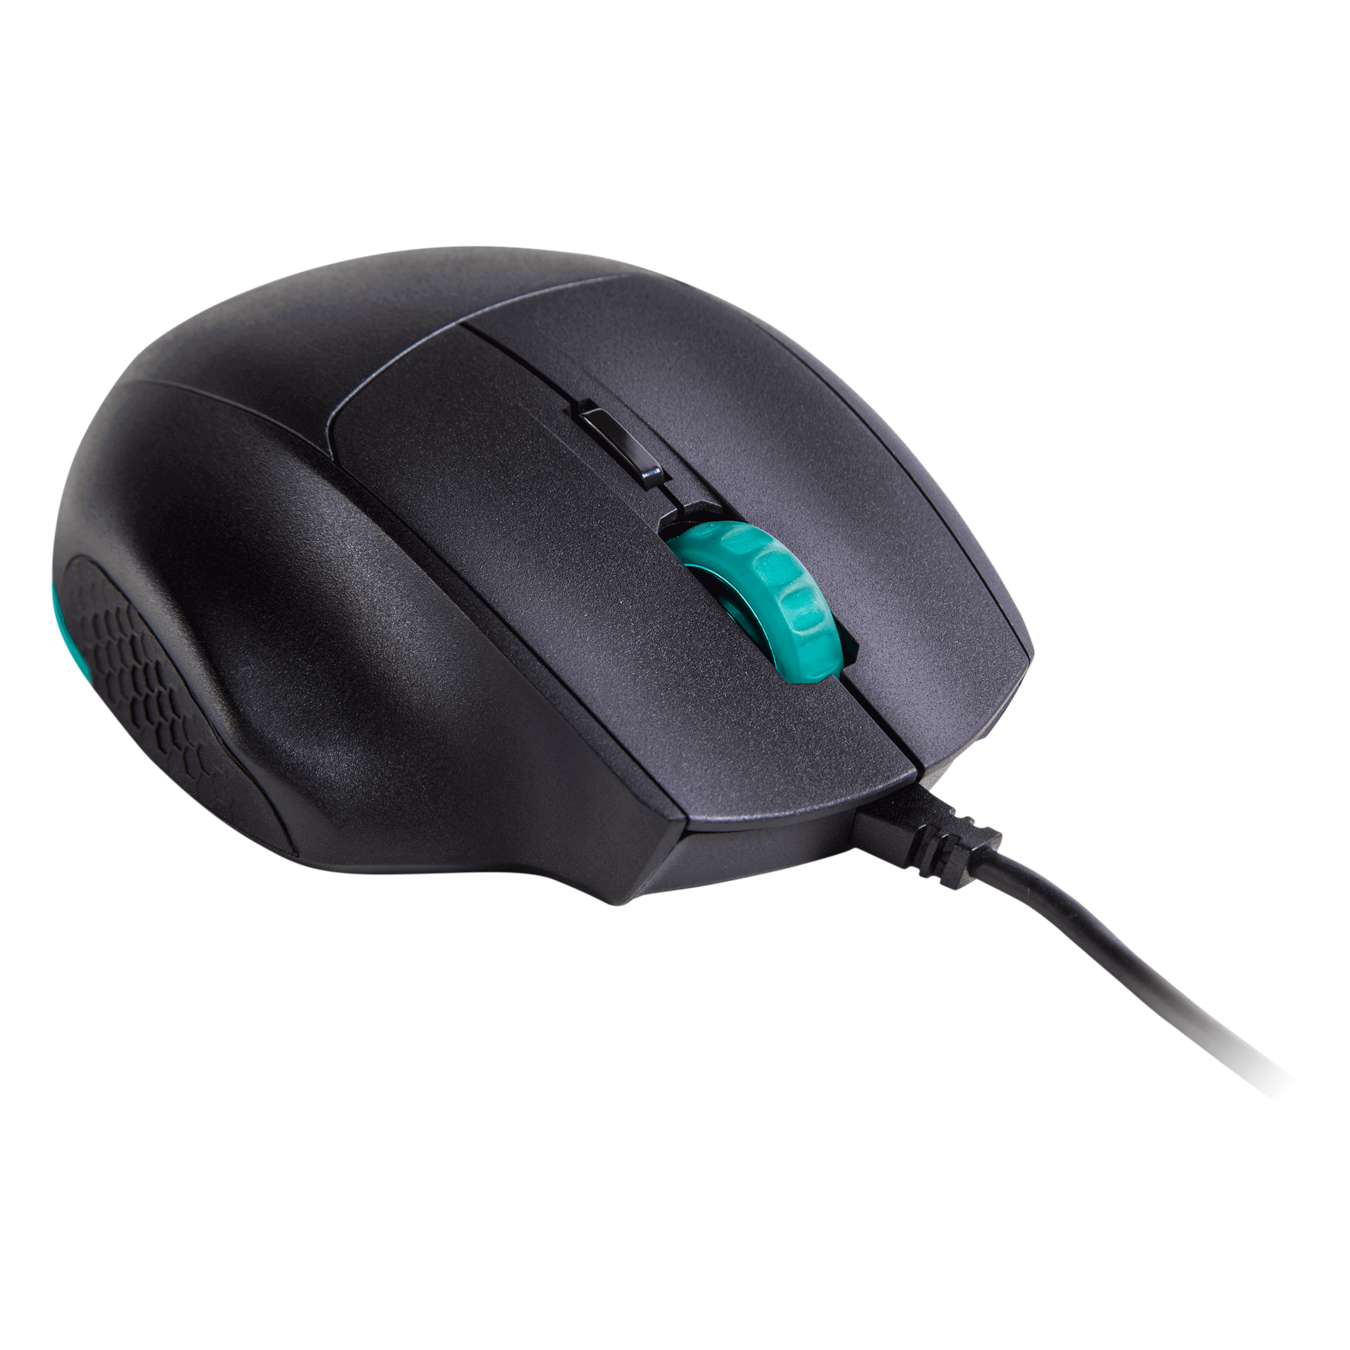 MasterMouse MM520 Gaming Mouse - Unique, ergonomic right handed claw grip design which is highly regarded as one of the best claw grip designs for FPS and RTS Gaming.